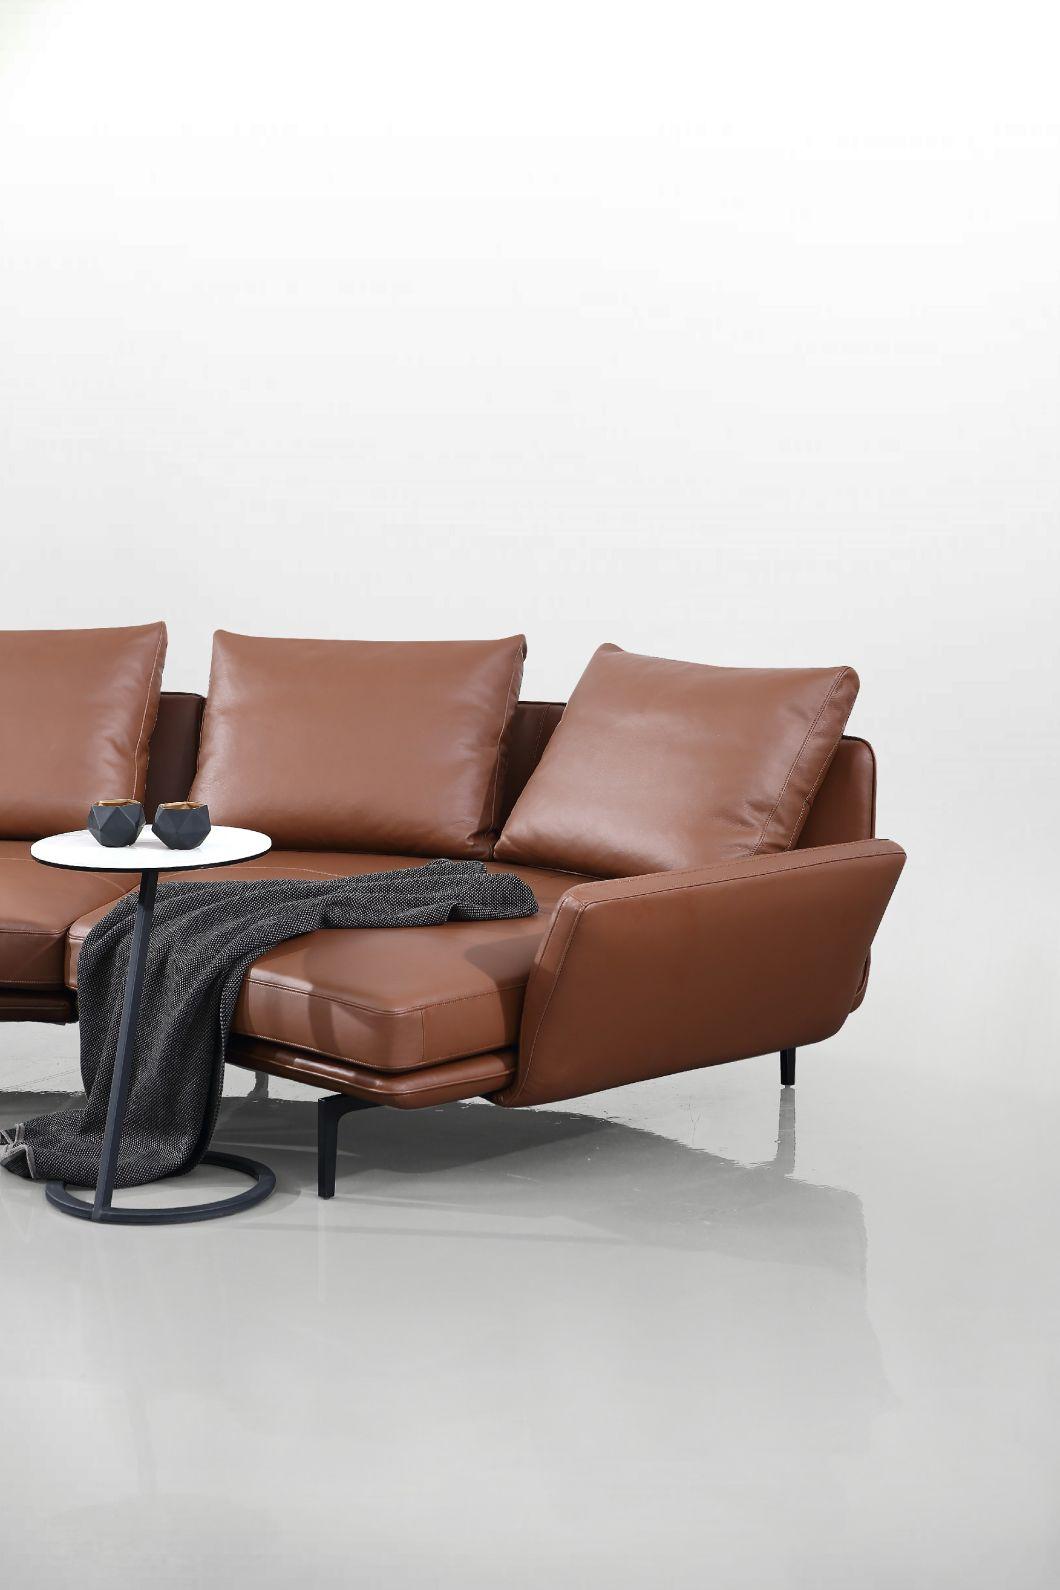 New Modern Home Furniture Multi-Functional Sectional Leather Sofa Set Fabric Sofa